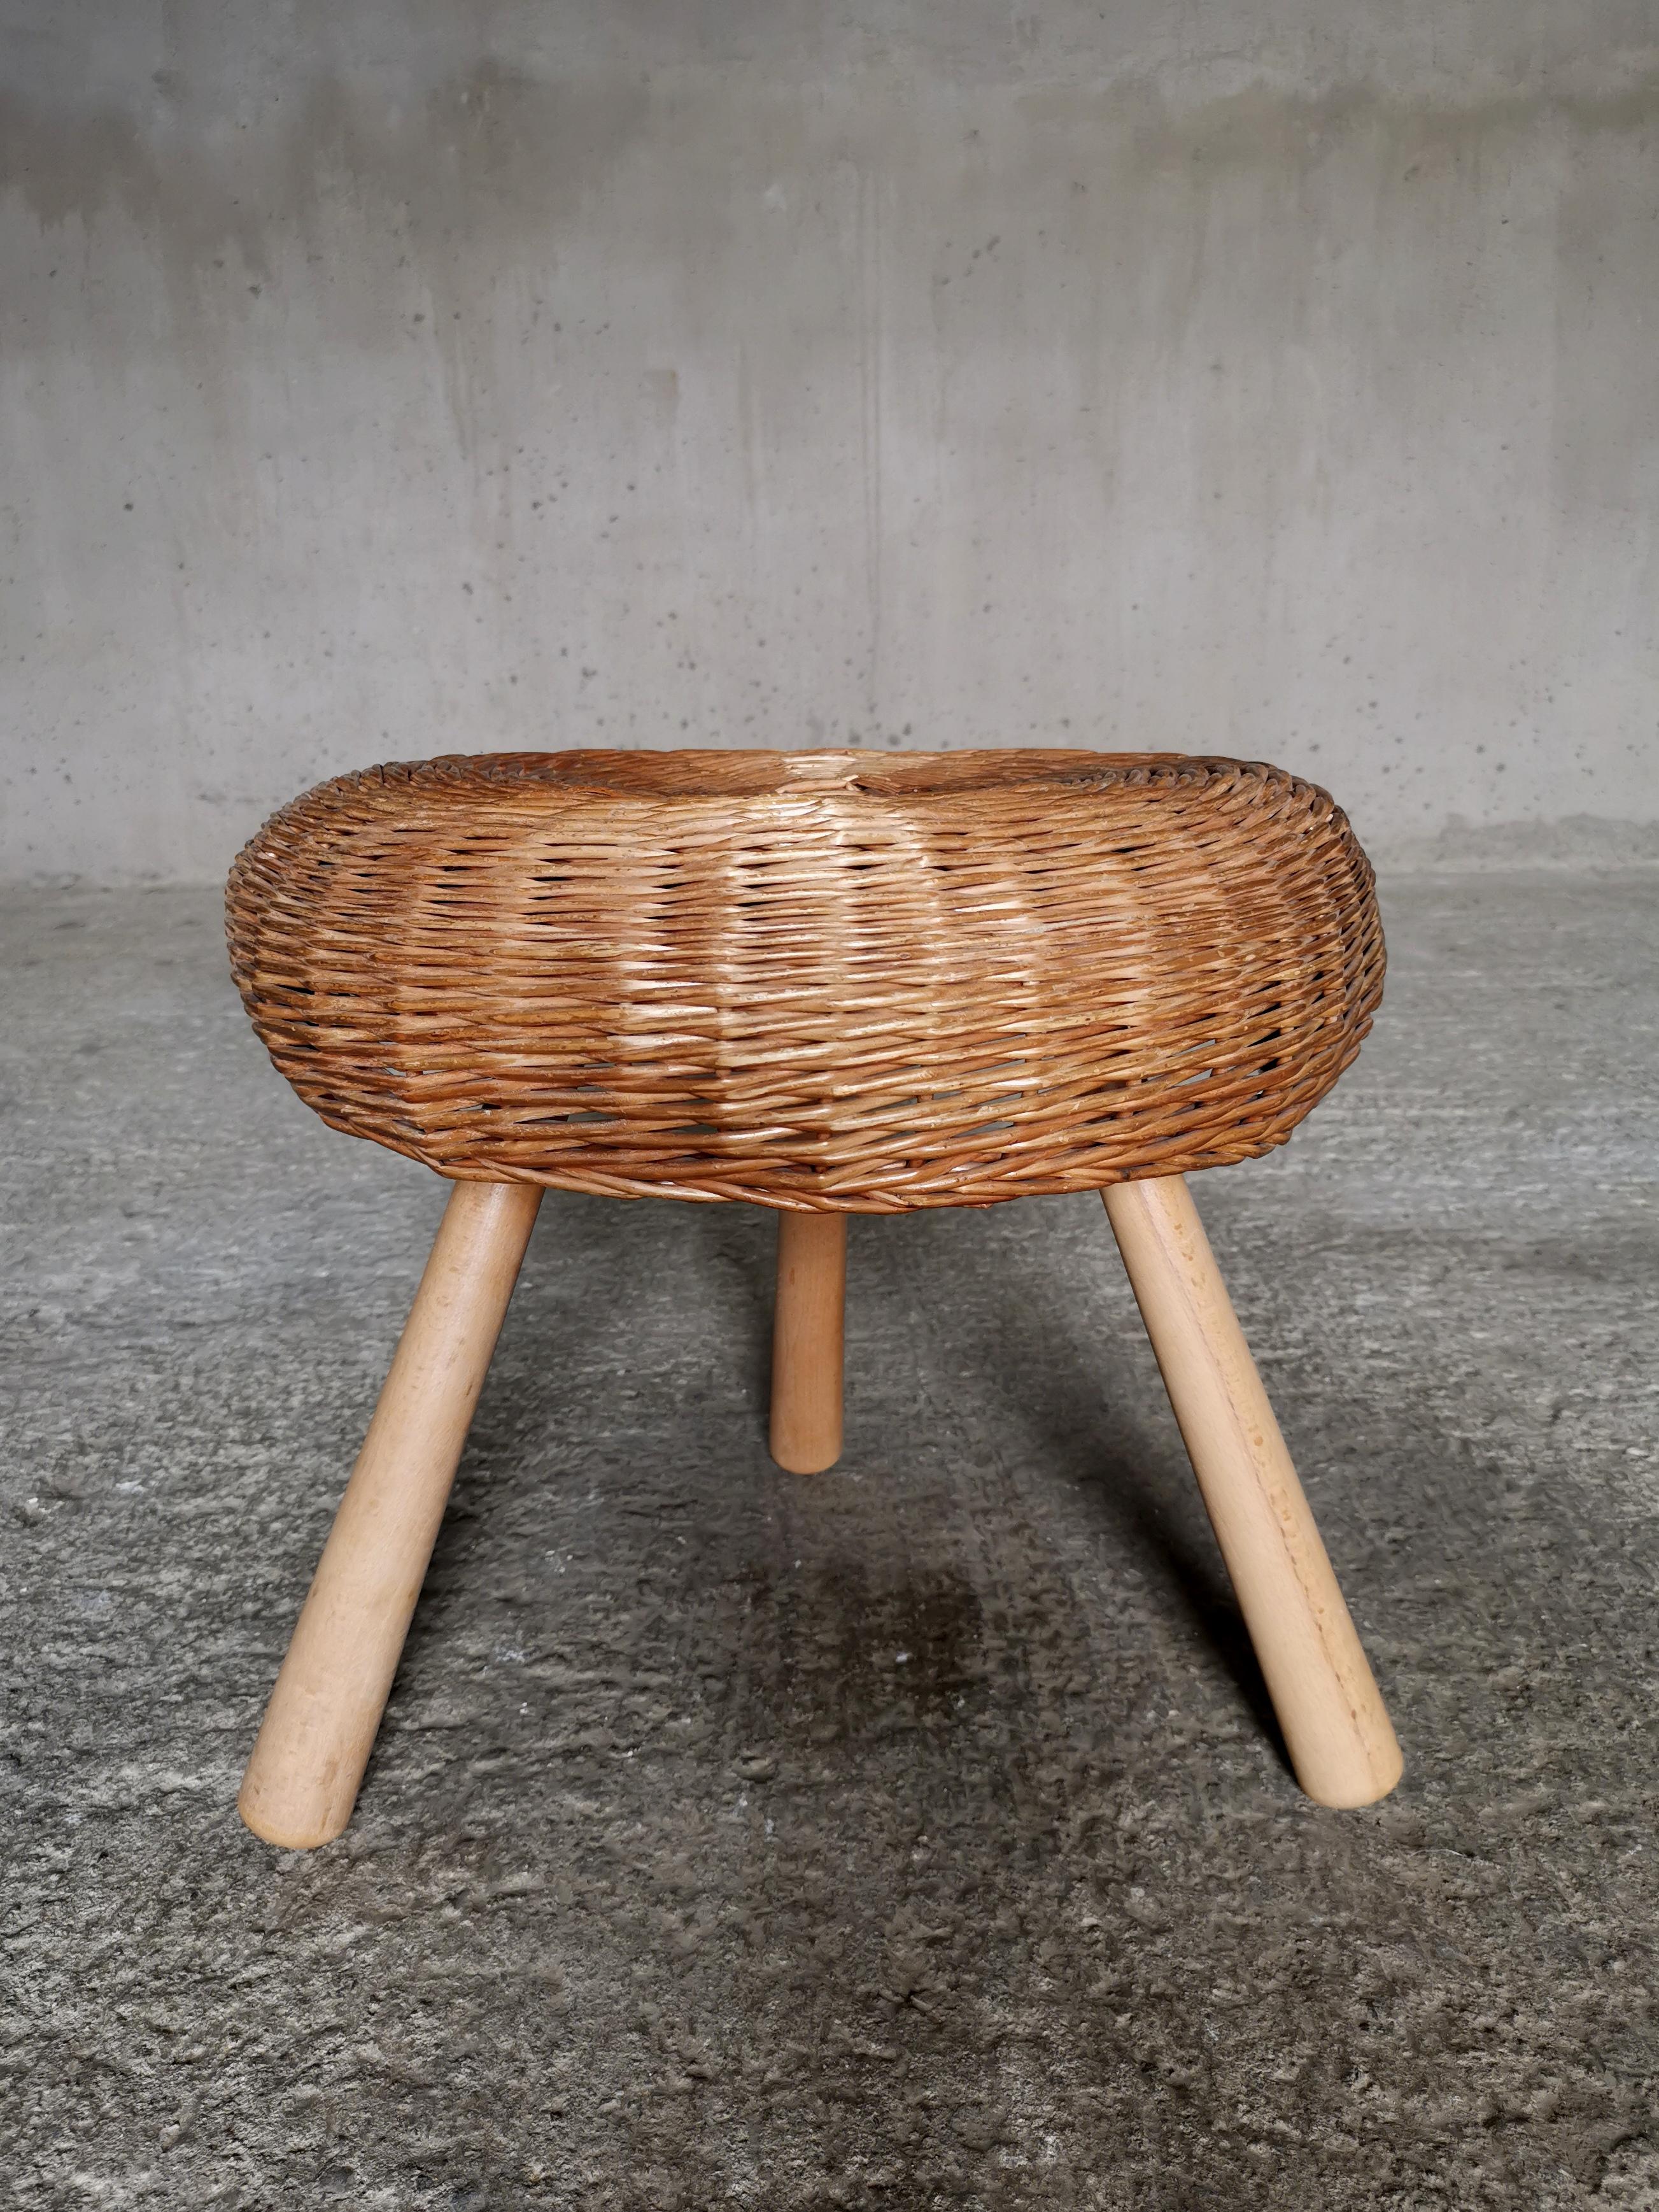 This large Swedish rattan/cane tripod stool in the style of Tony Paul comes from a 1950 family vacation cottage in the Swedish coastal town Höllviken
Acquired from family of the original owner this stool was been kept in mint condition.
With at